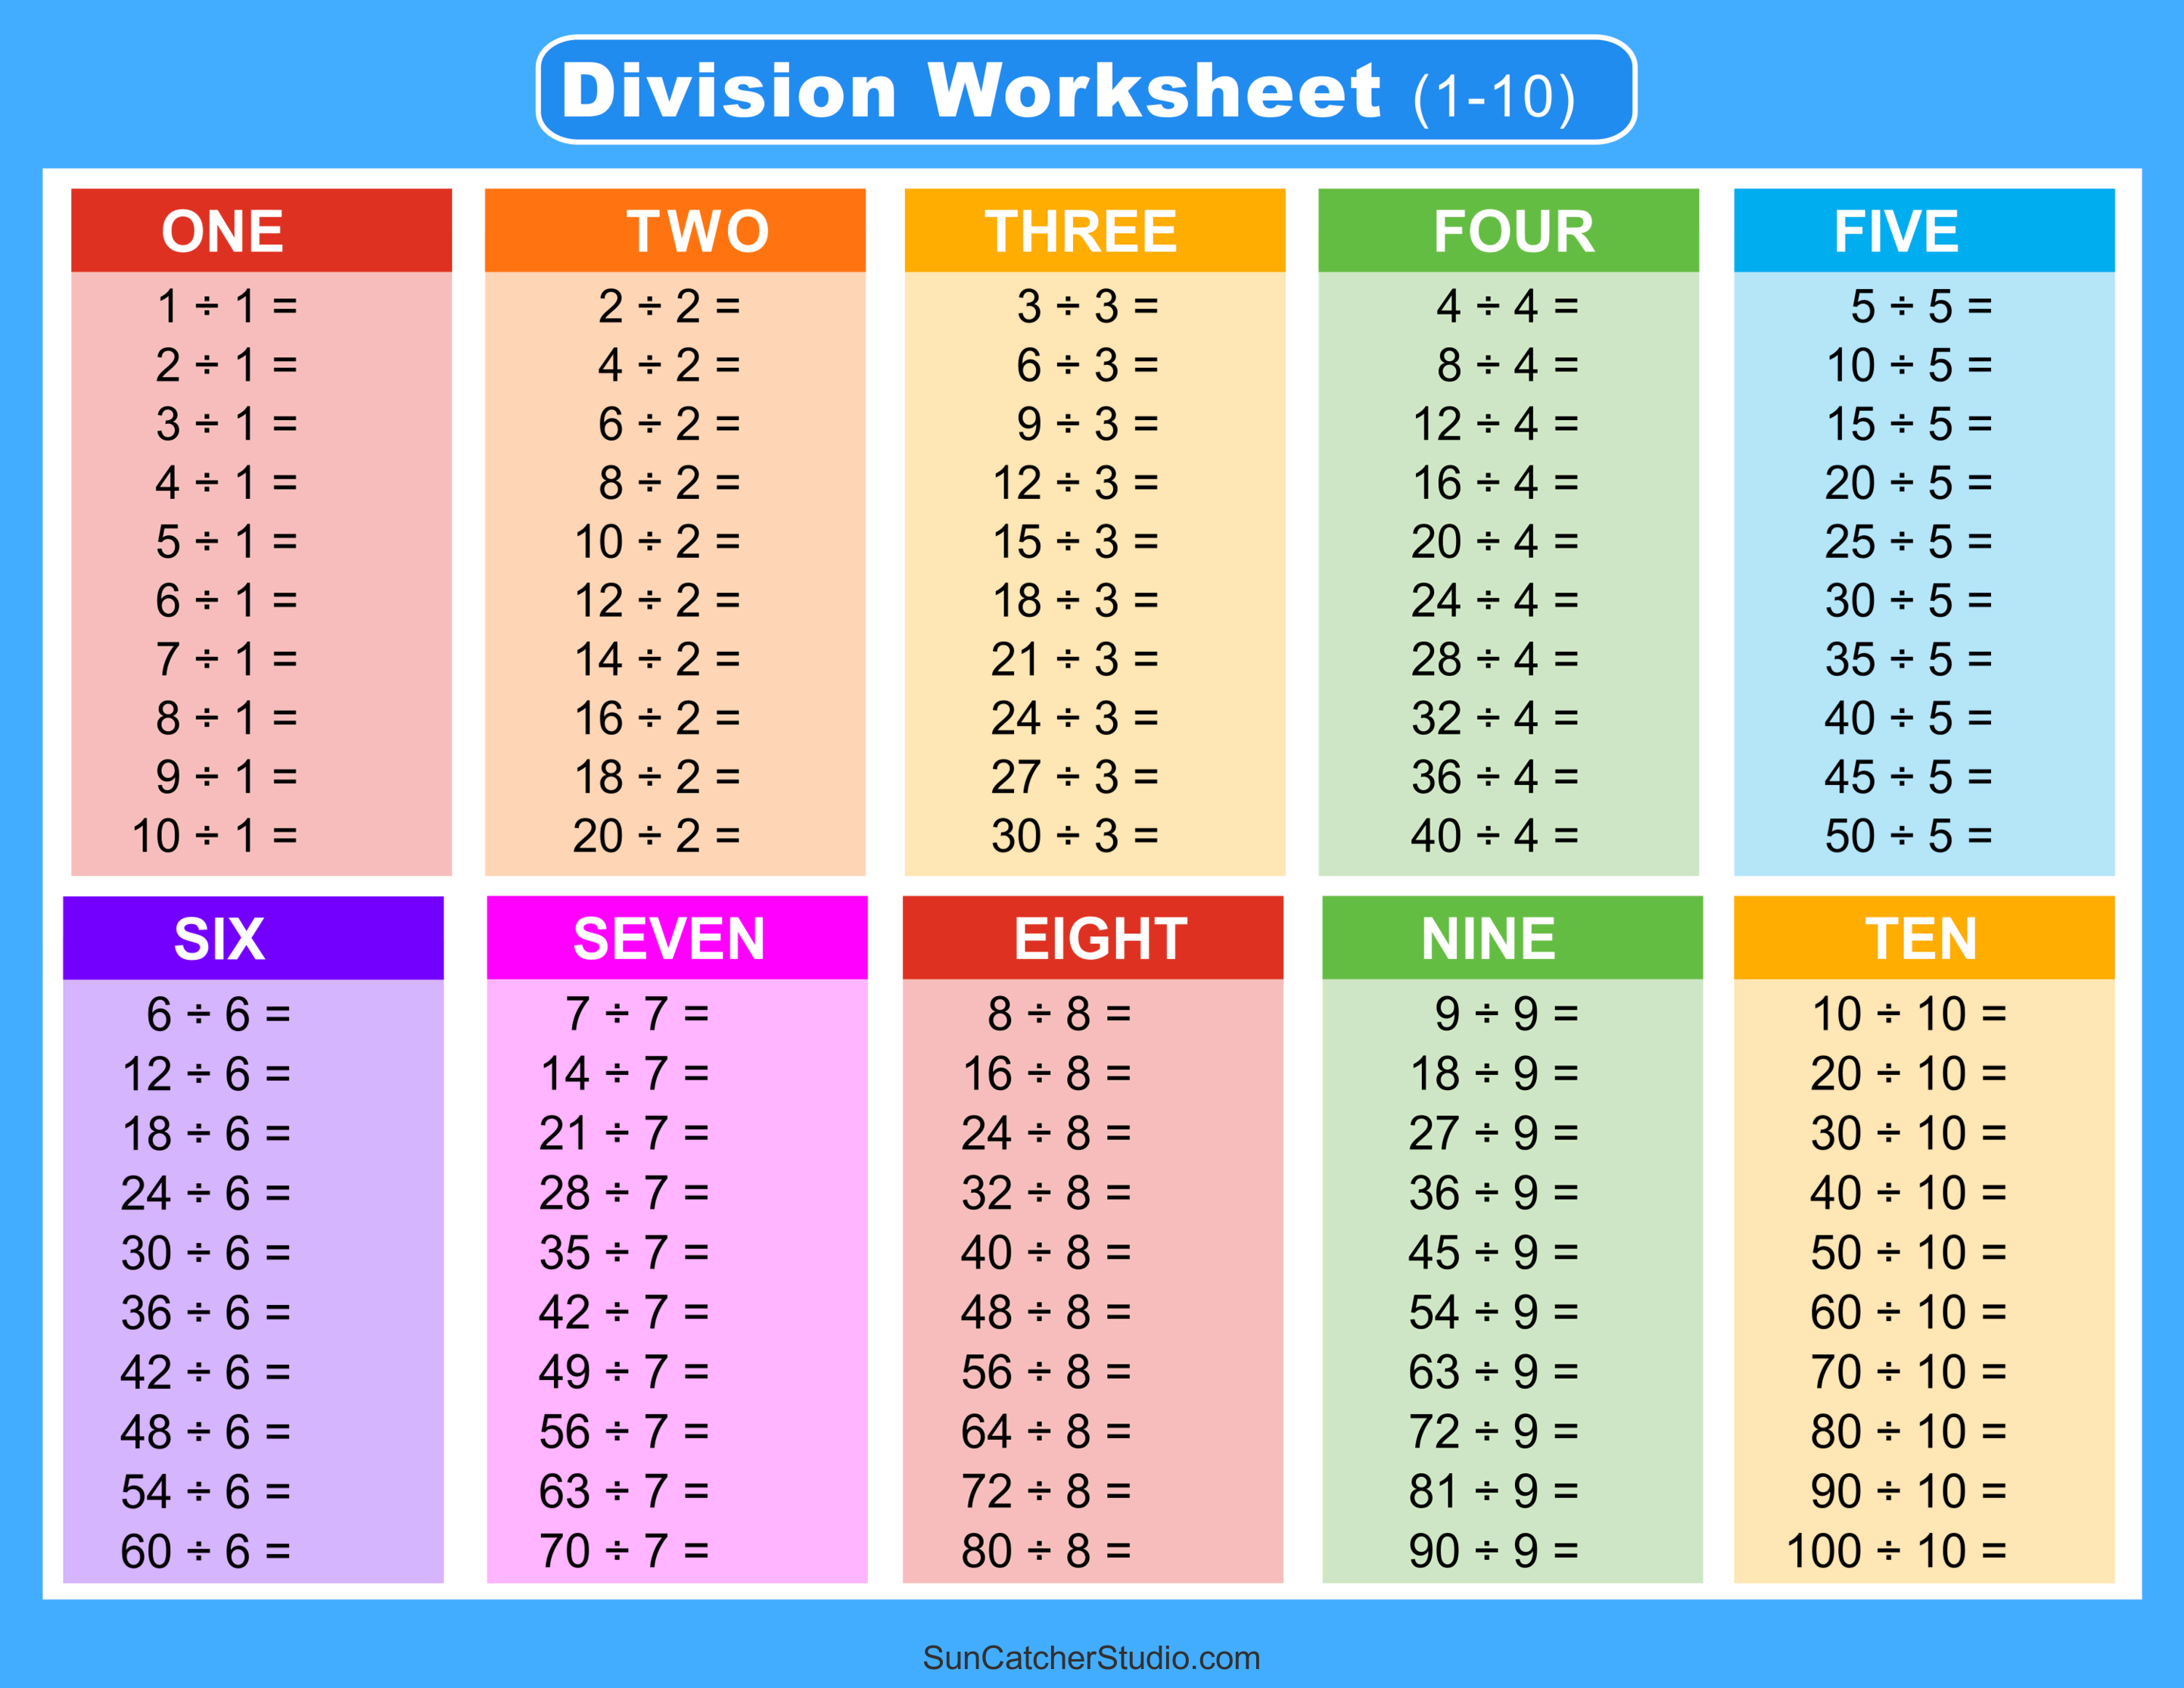 division chart up to 1000